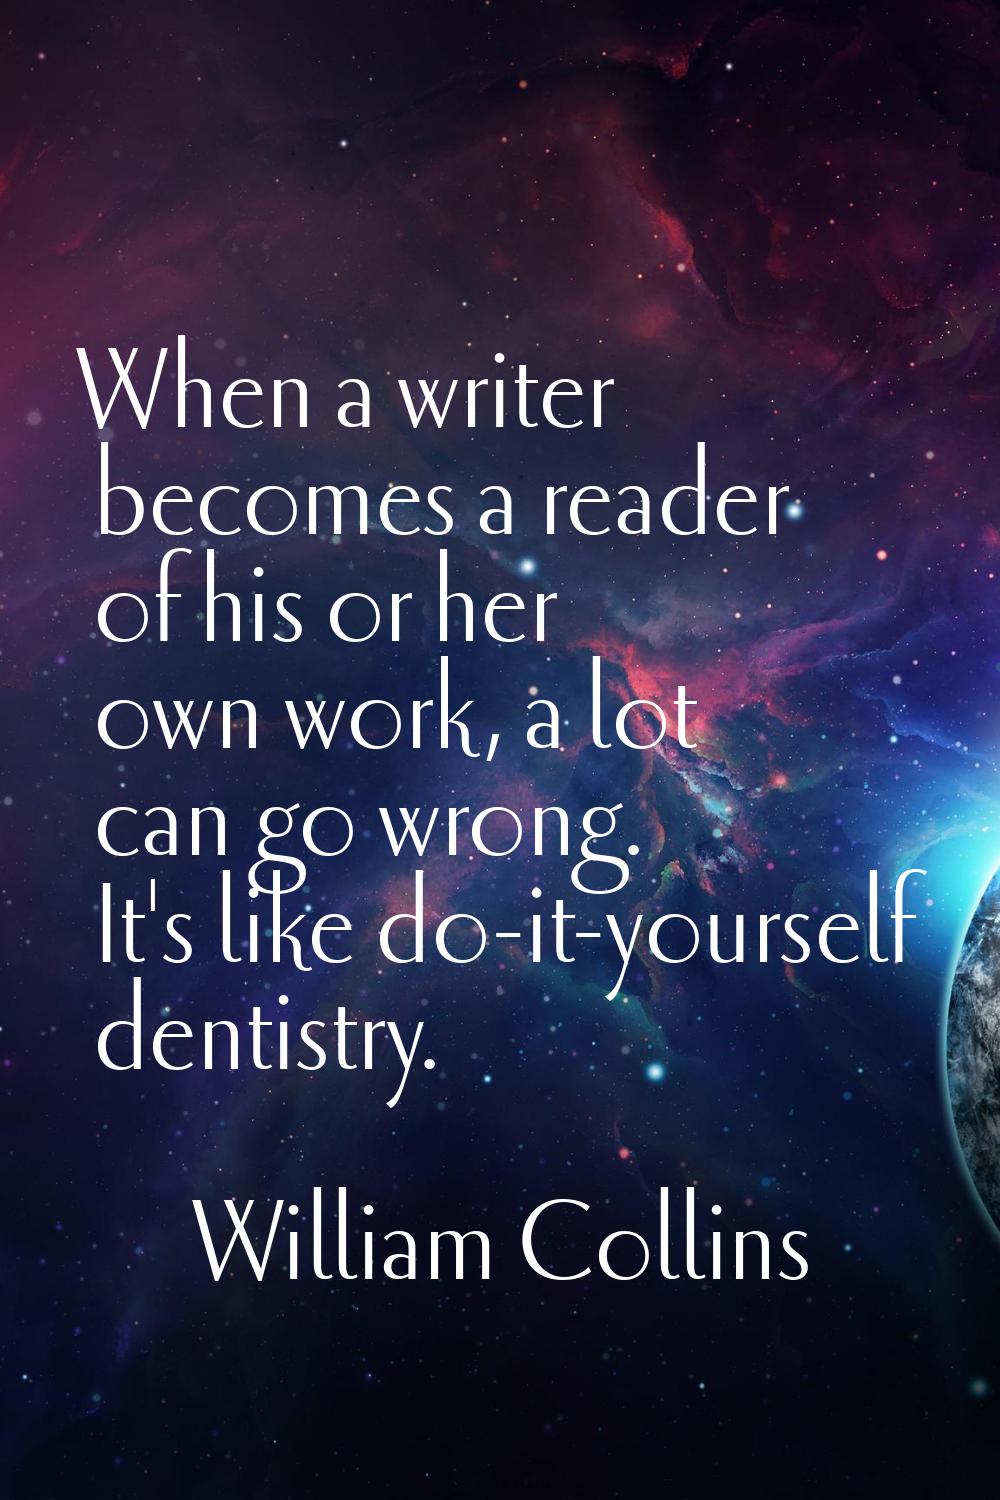 When a writer becomes a reader of his or her own work, a lot can go wrong. It's like do-it-yourself